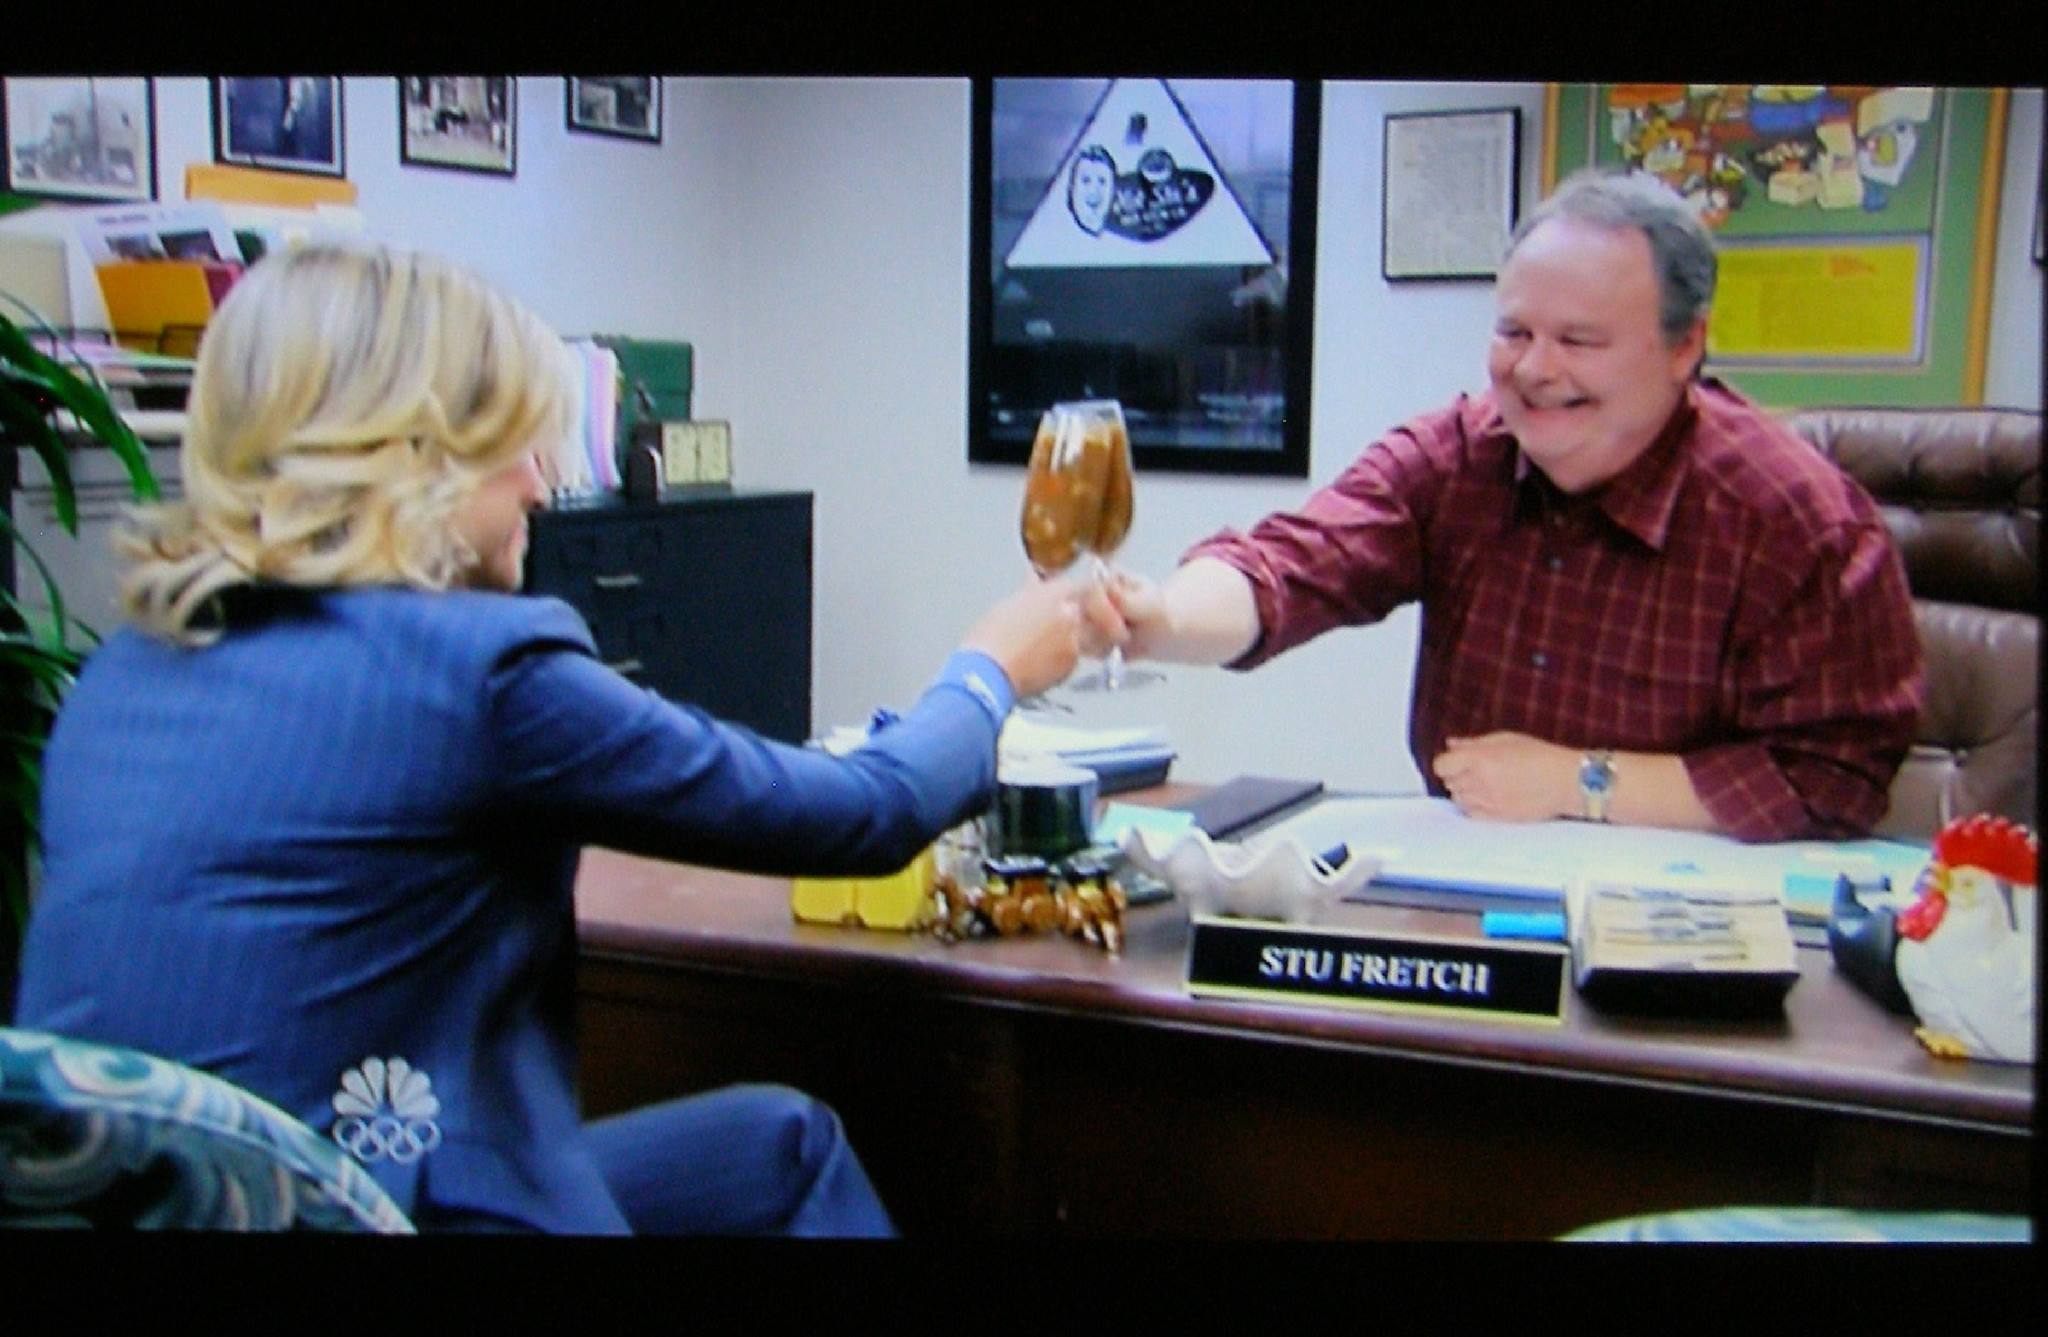 On Parks & Recreation with Amy Poehler